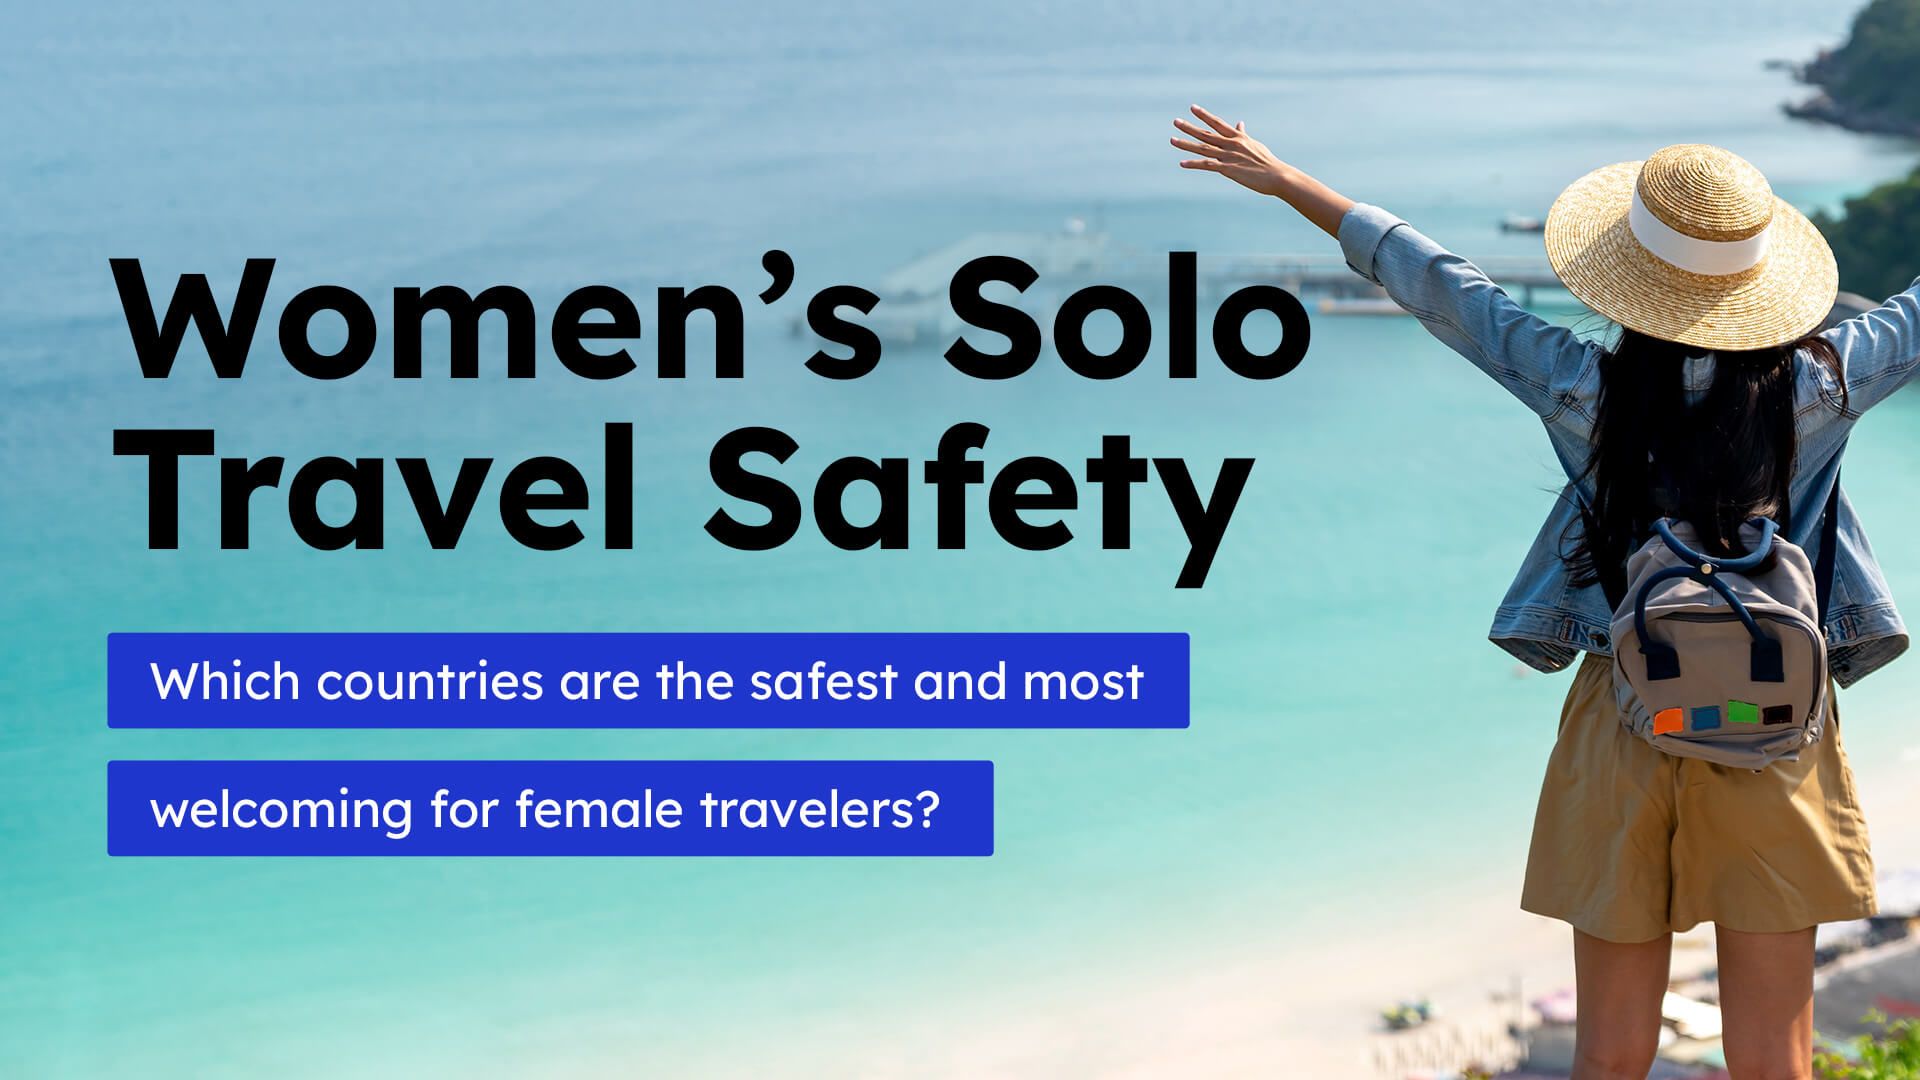 Study: Women Feel Less Safe About Traveling